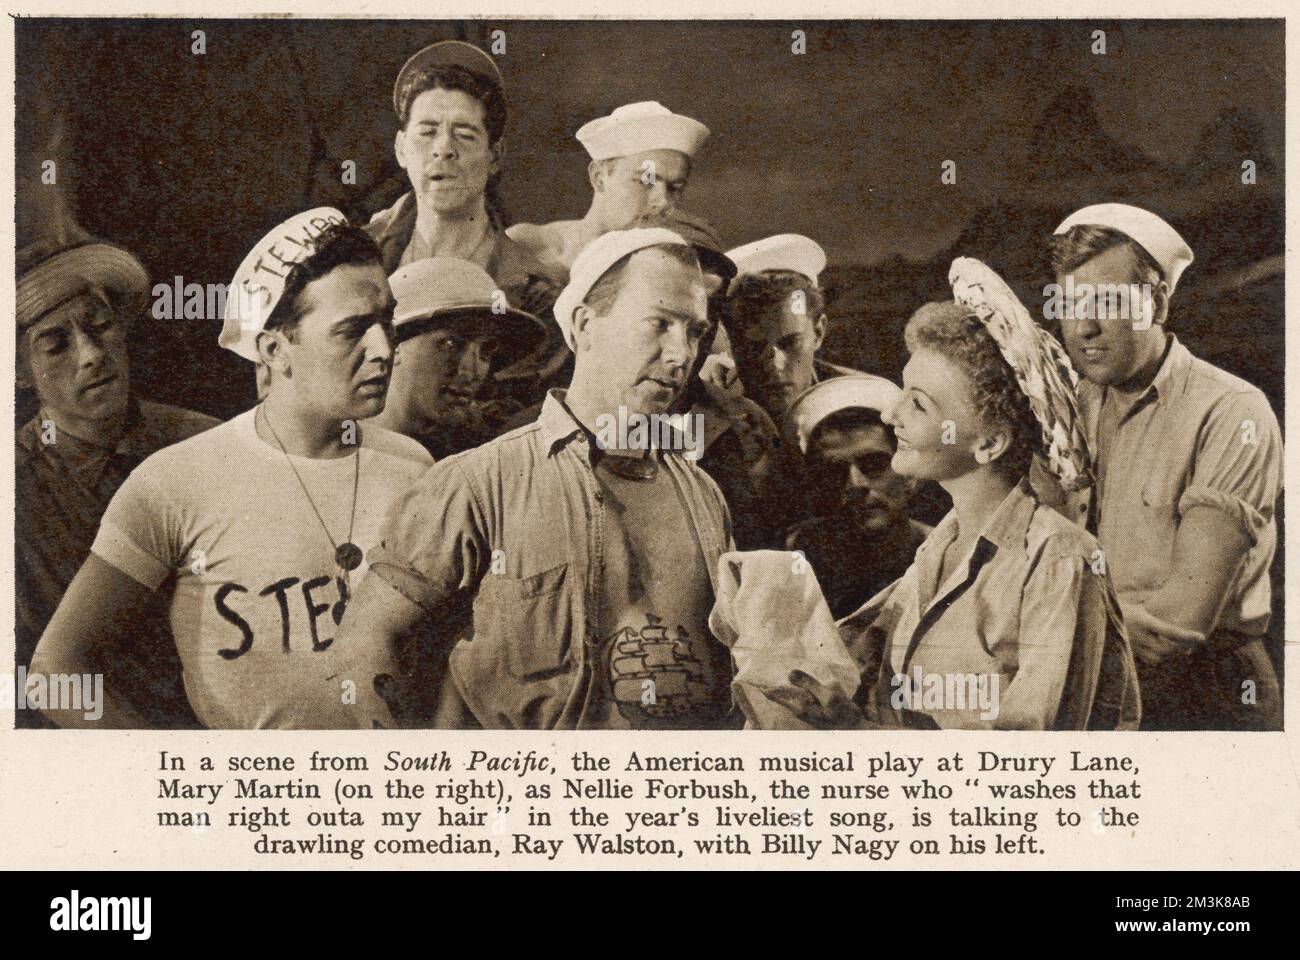 A scene from South Pacific, the American musical, at Drury Lane Theatre in 1952. Mary Martin (right) played Nellie Forbush, and is talking to the comedian Ray Walston, with Billy Nagy on his left.     Date: 1952 Stock Photo